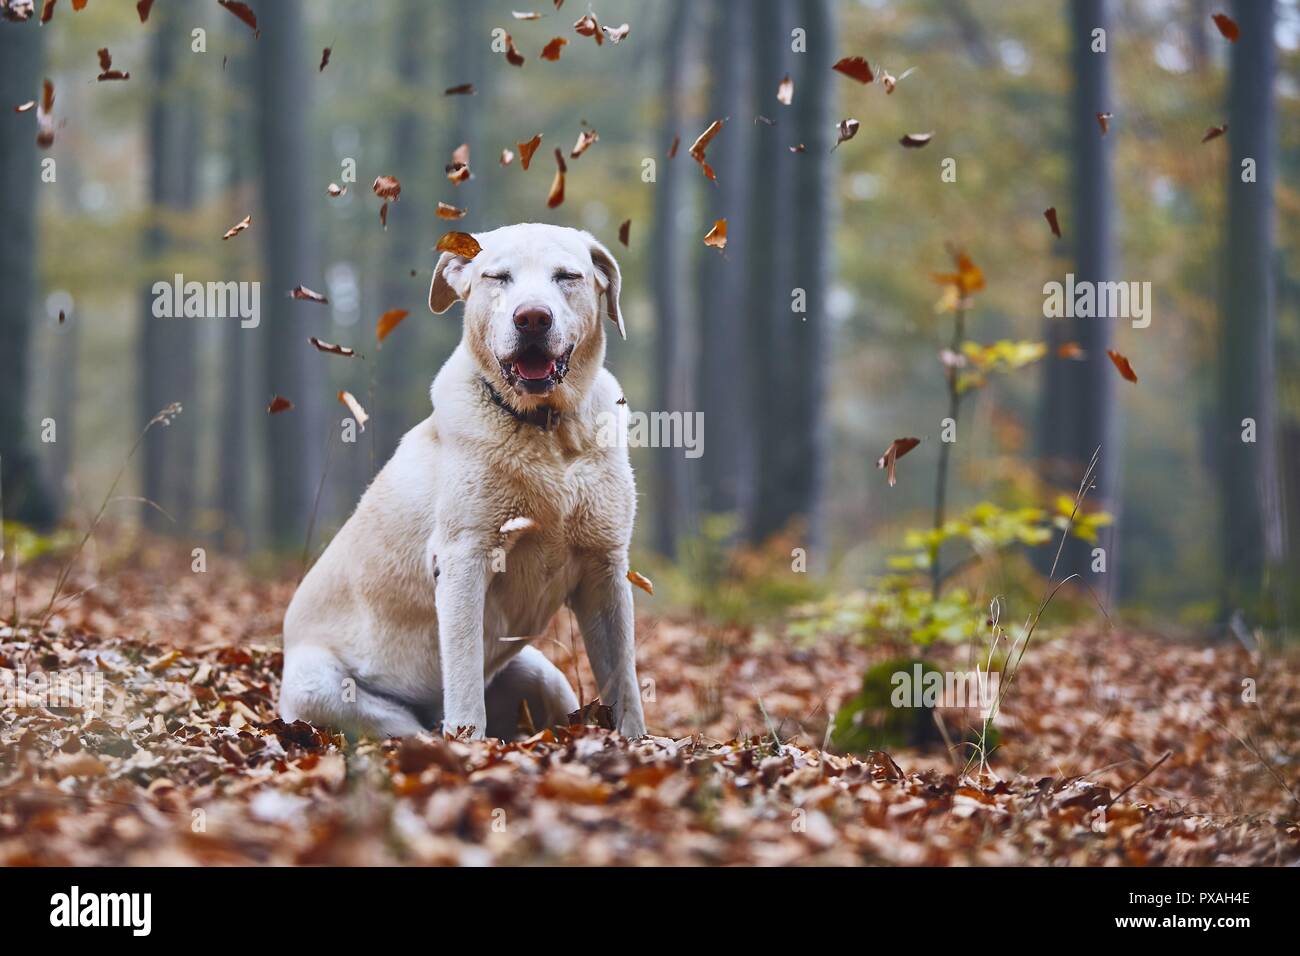 Dog in autumn. Happy labrador retriever sitting in forest and enjoying falling leaves. Stock Photo